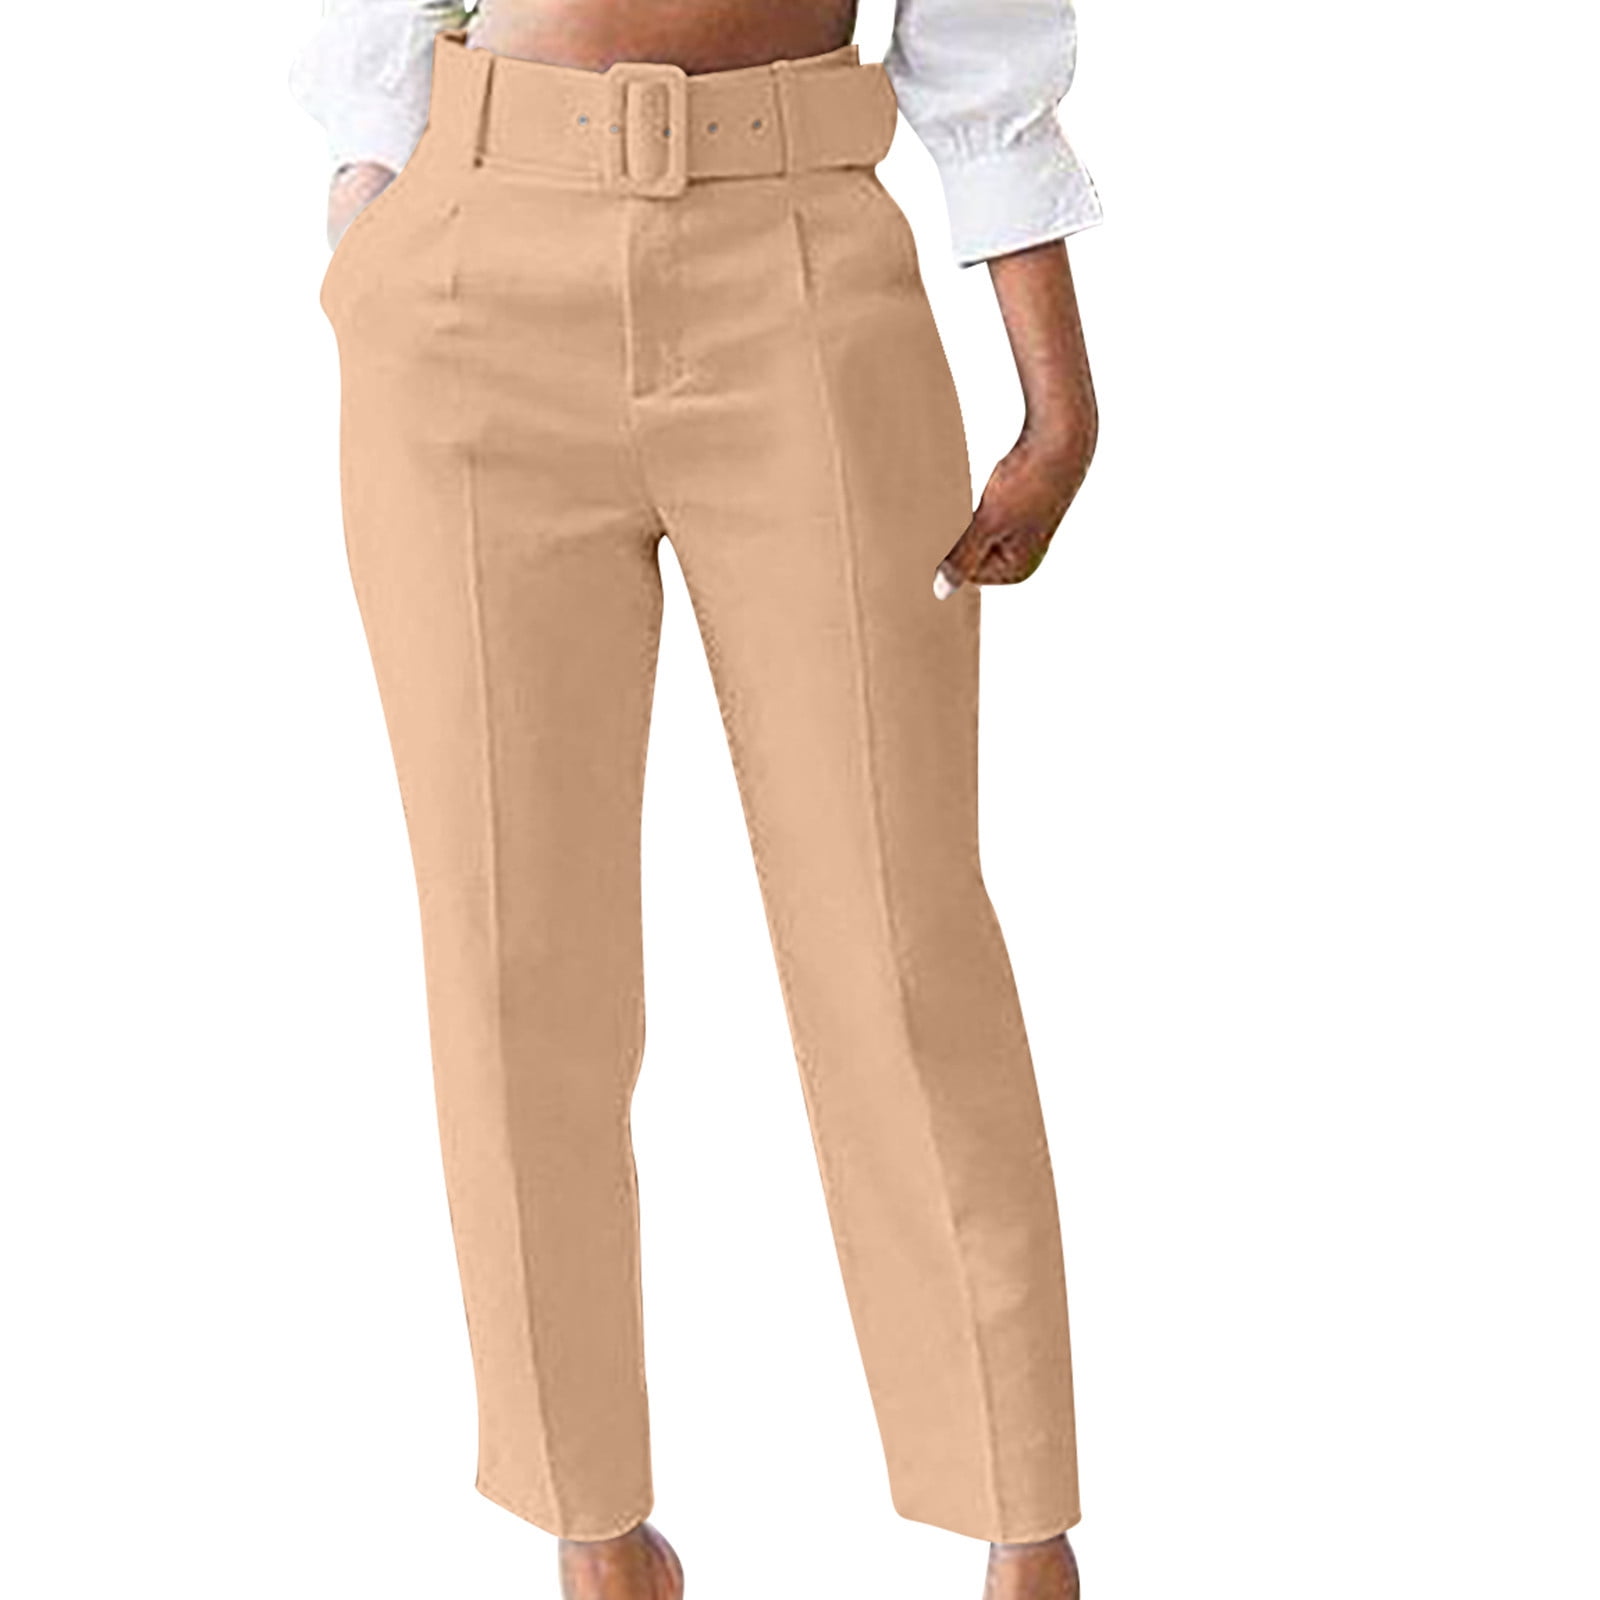 FRAULEIN Women's Formal Office Pants Casual Stretchy Trousers